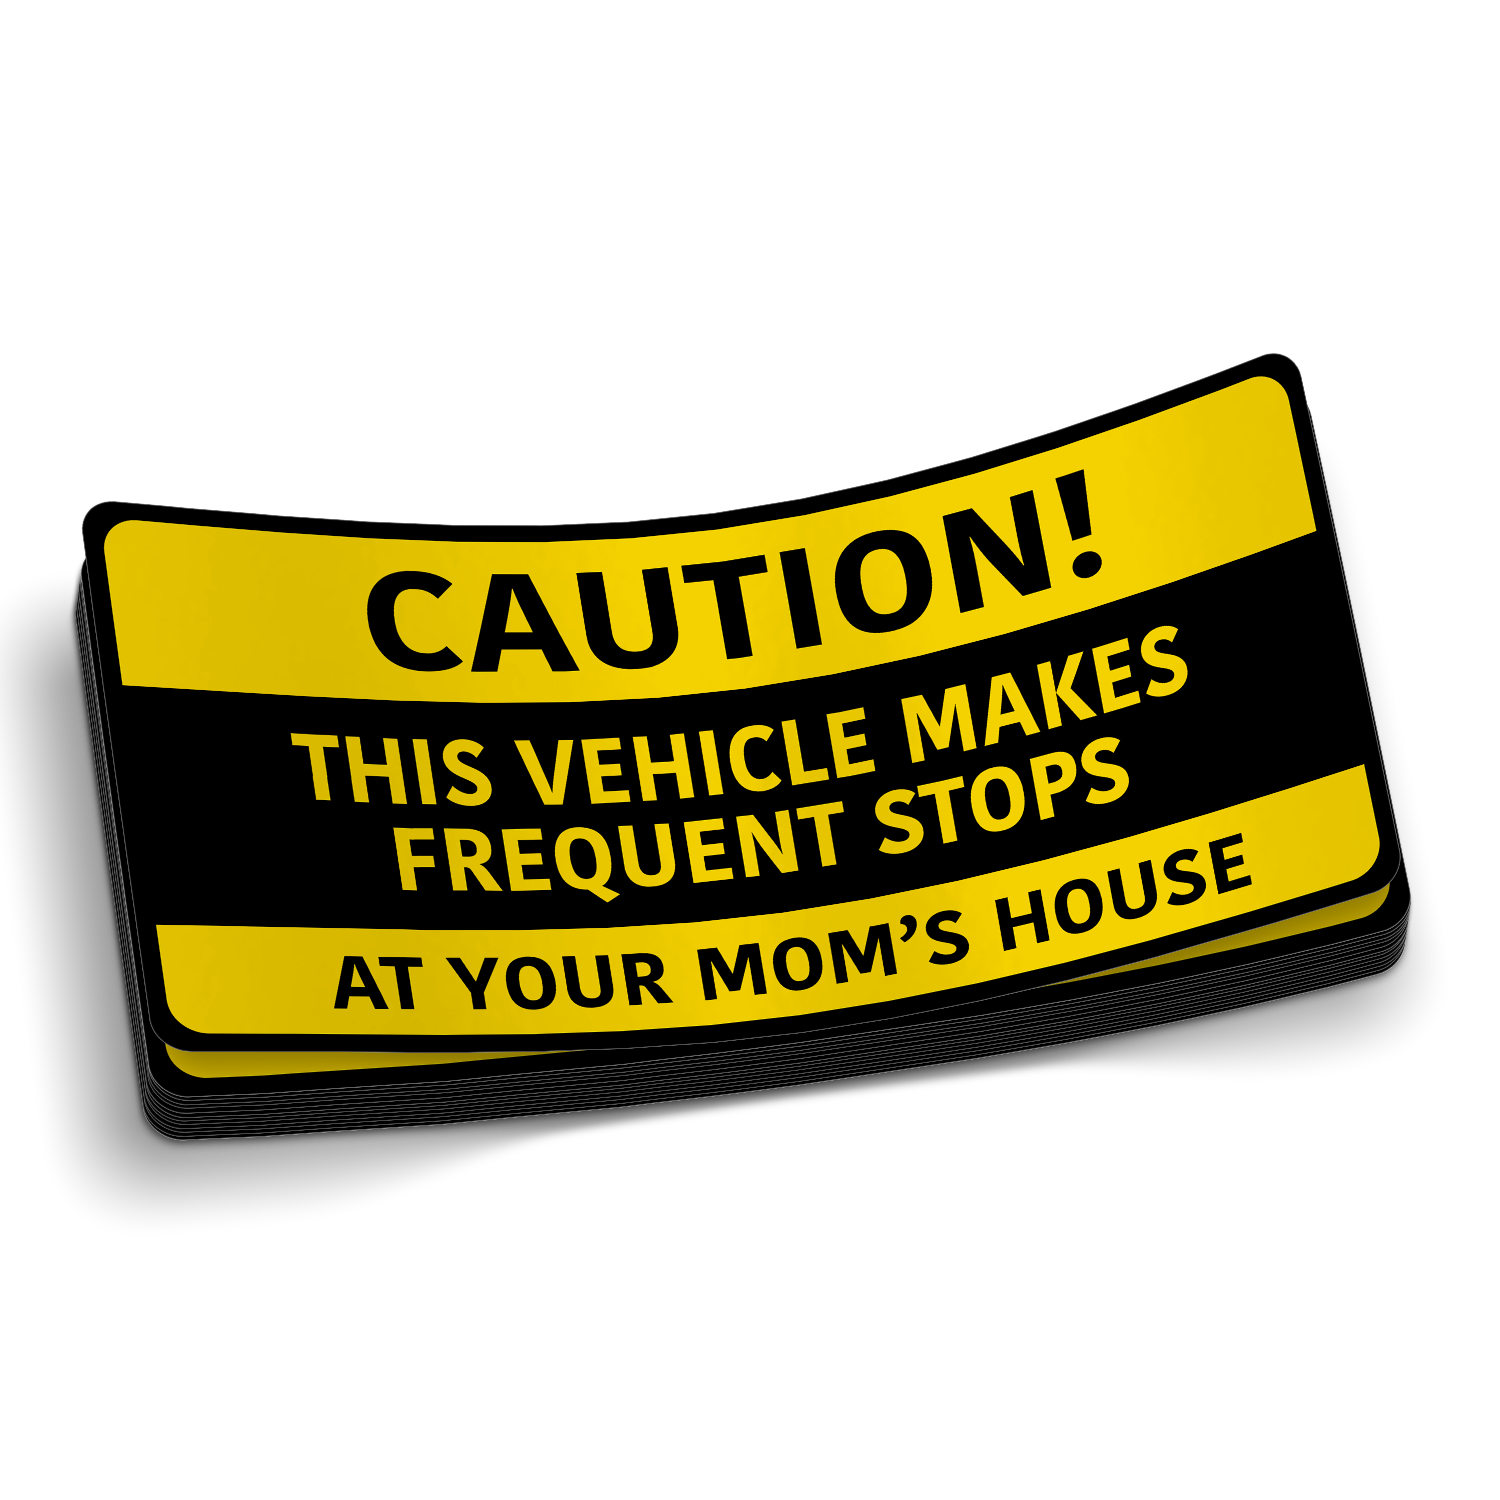 CAUTION - Stop at Your Mom's House